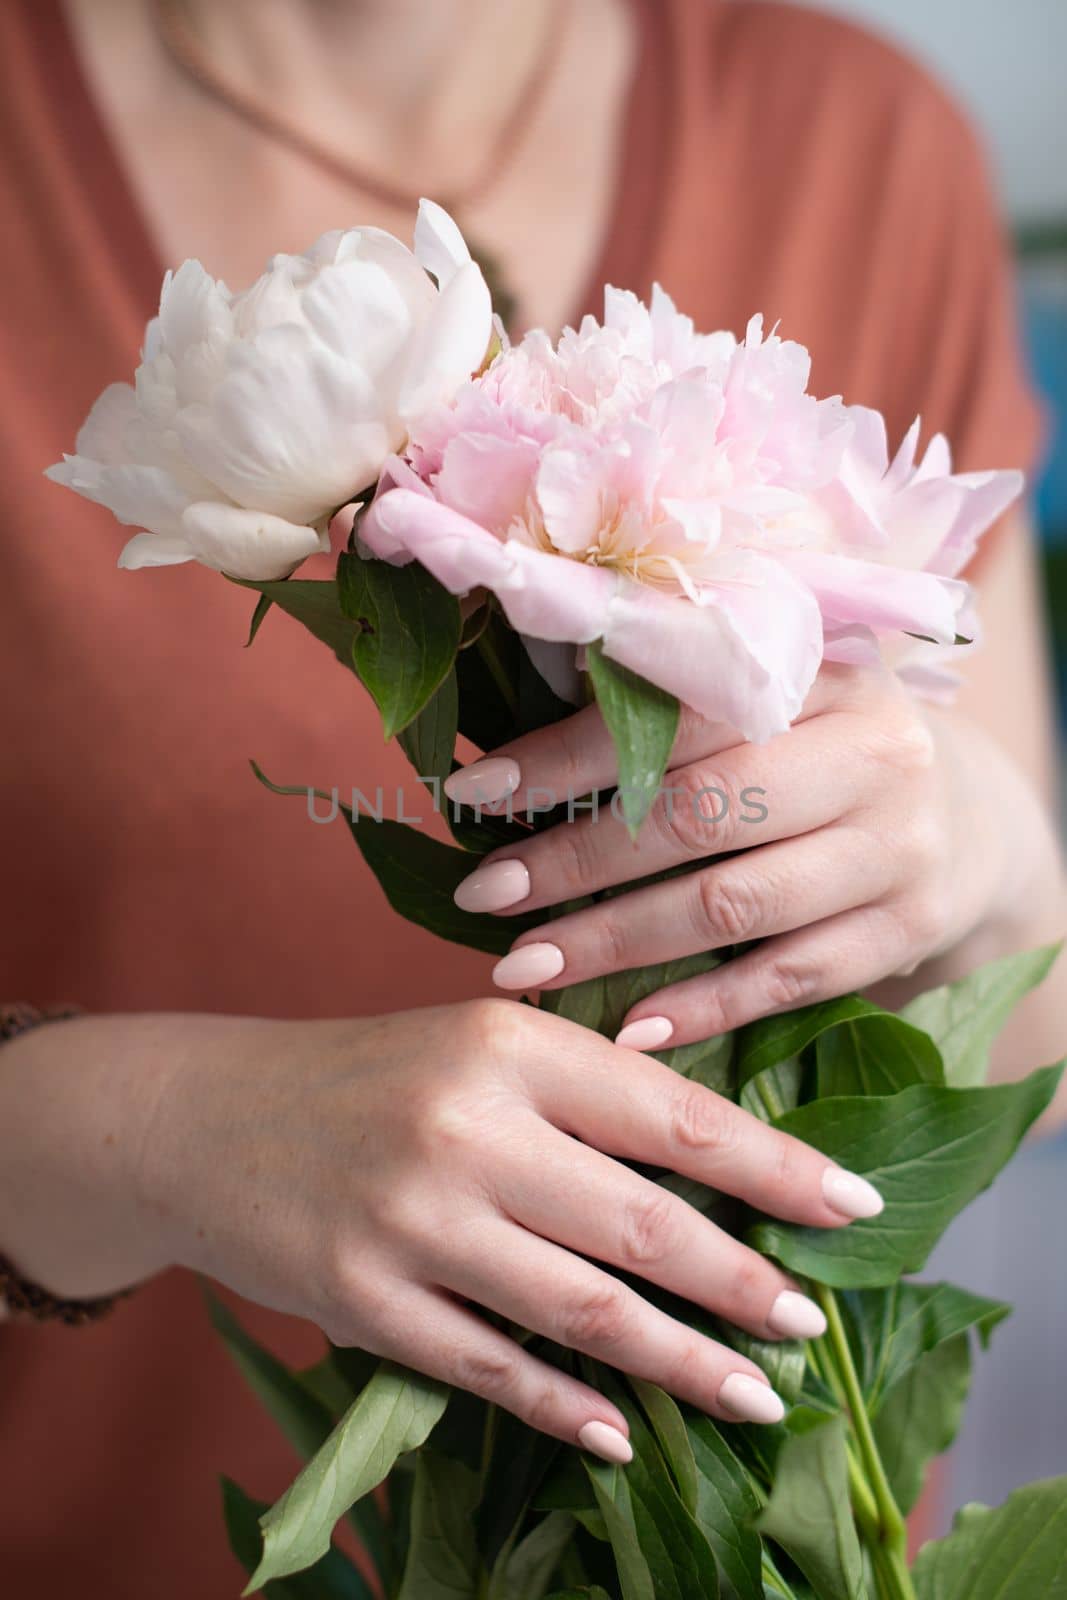 girl's hands with a beautiful pink manicure design, pastel color, gently, flowers in spring. High quality photo